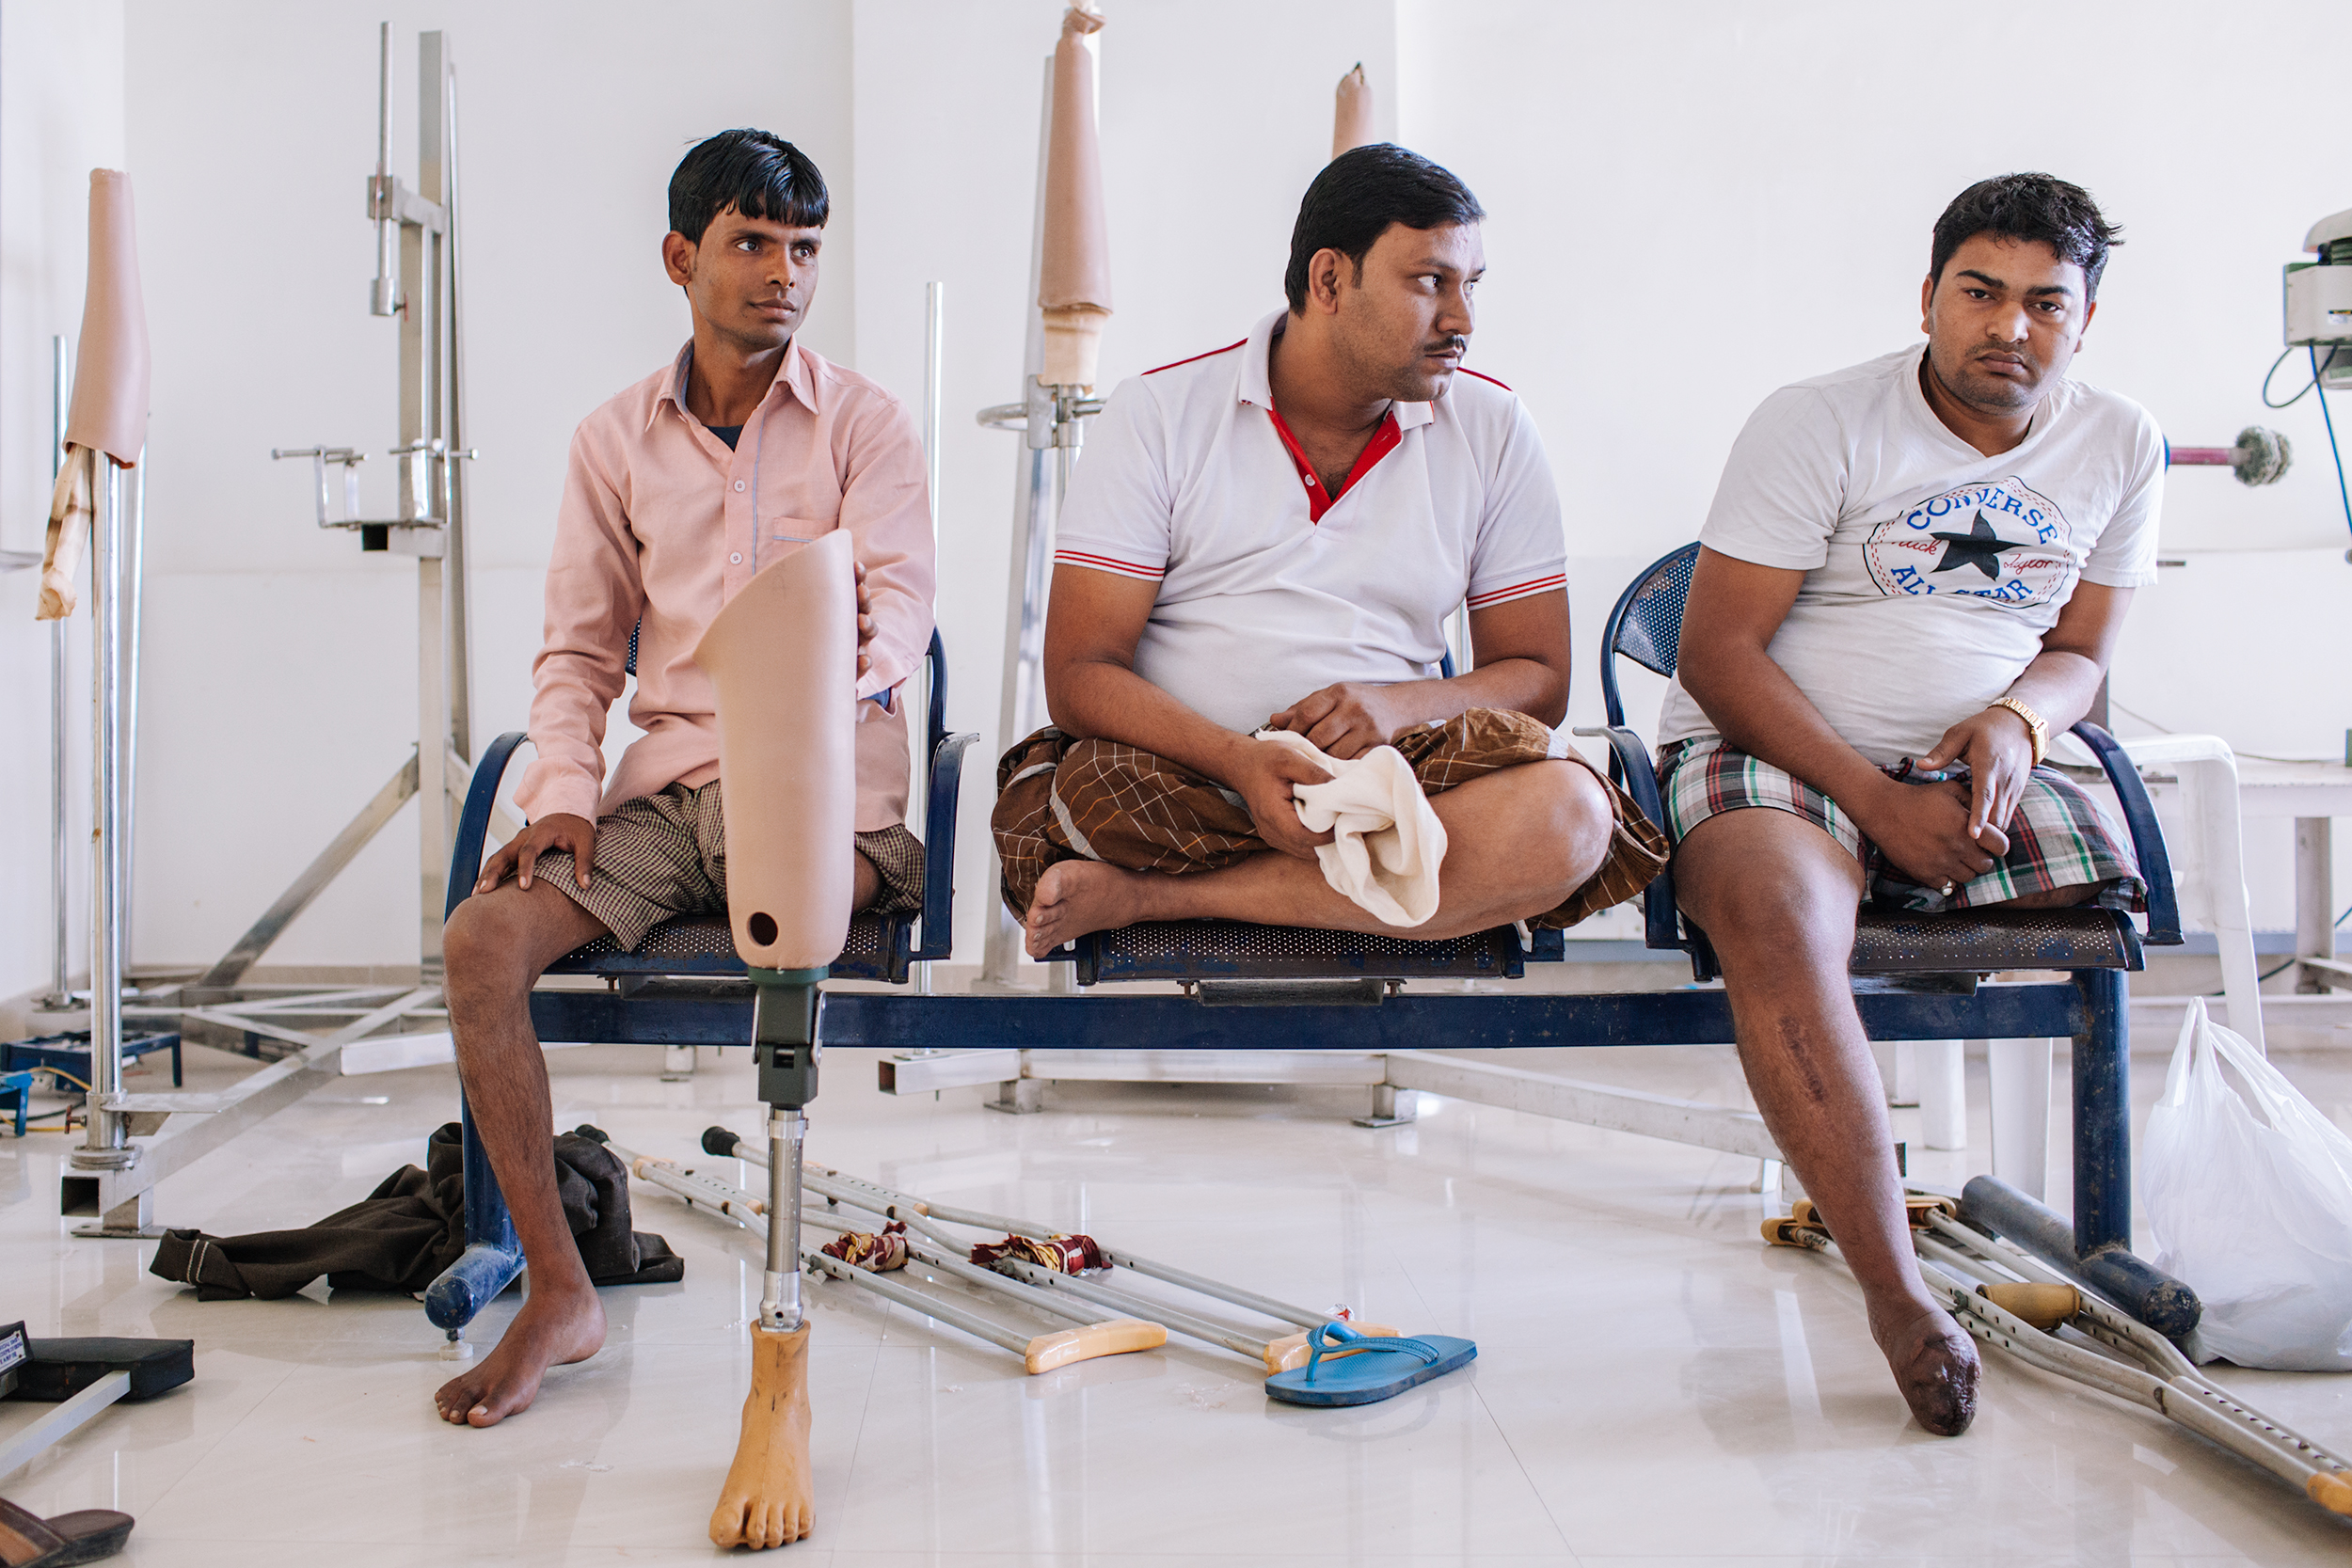  Patients wait for the measurements. BMVSS sees more cases as a result of accidents than illnesses. The organization provides artificial limbs, calipers, physical aids and assistance completely free of charge. 